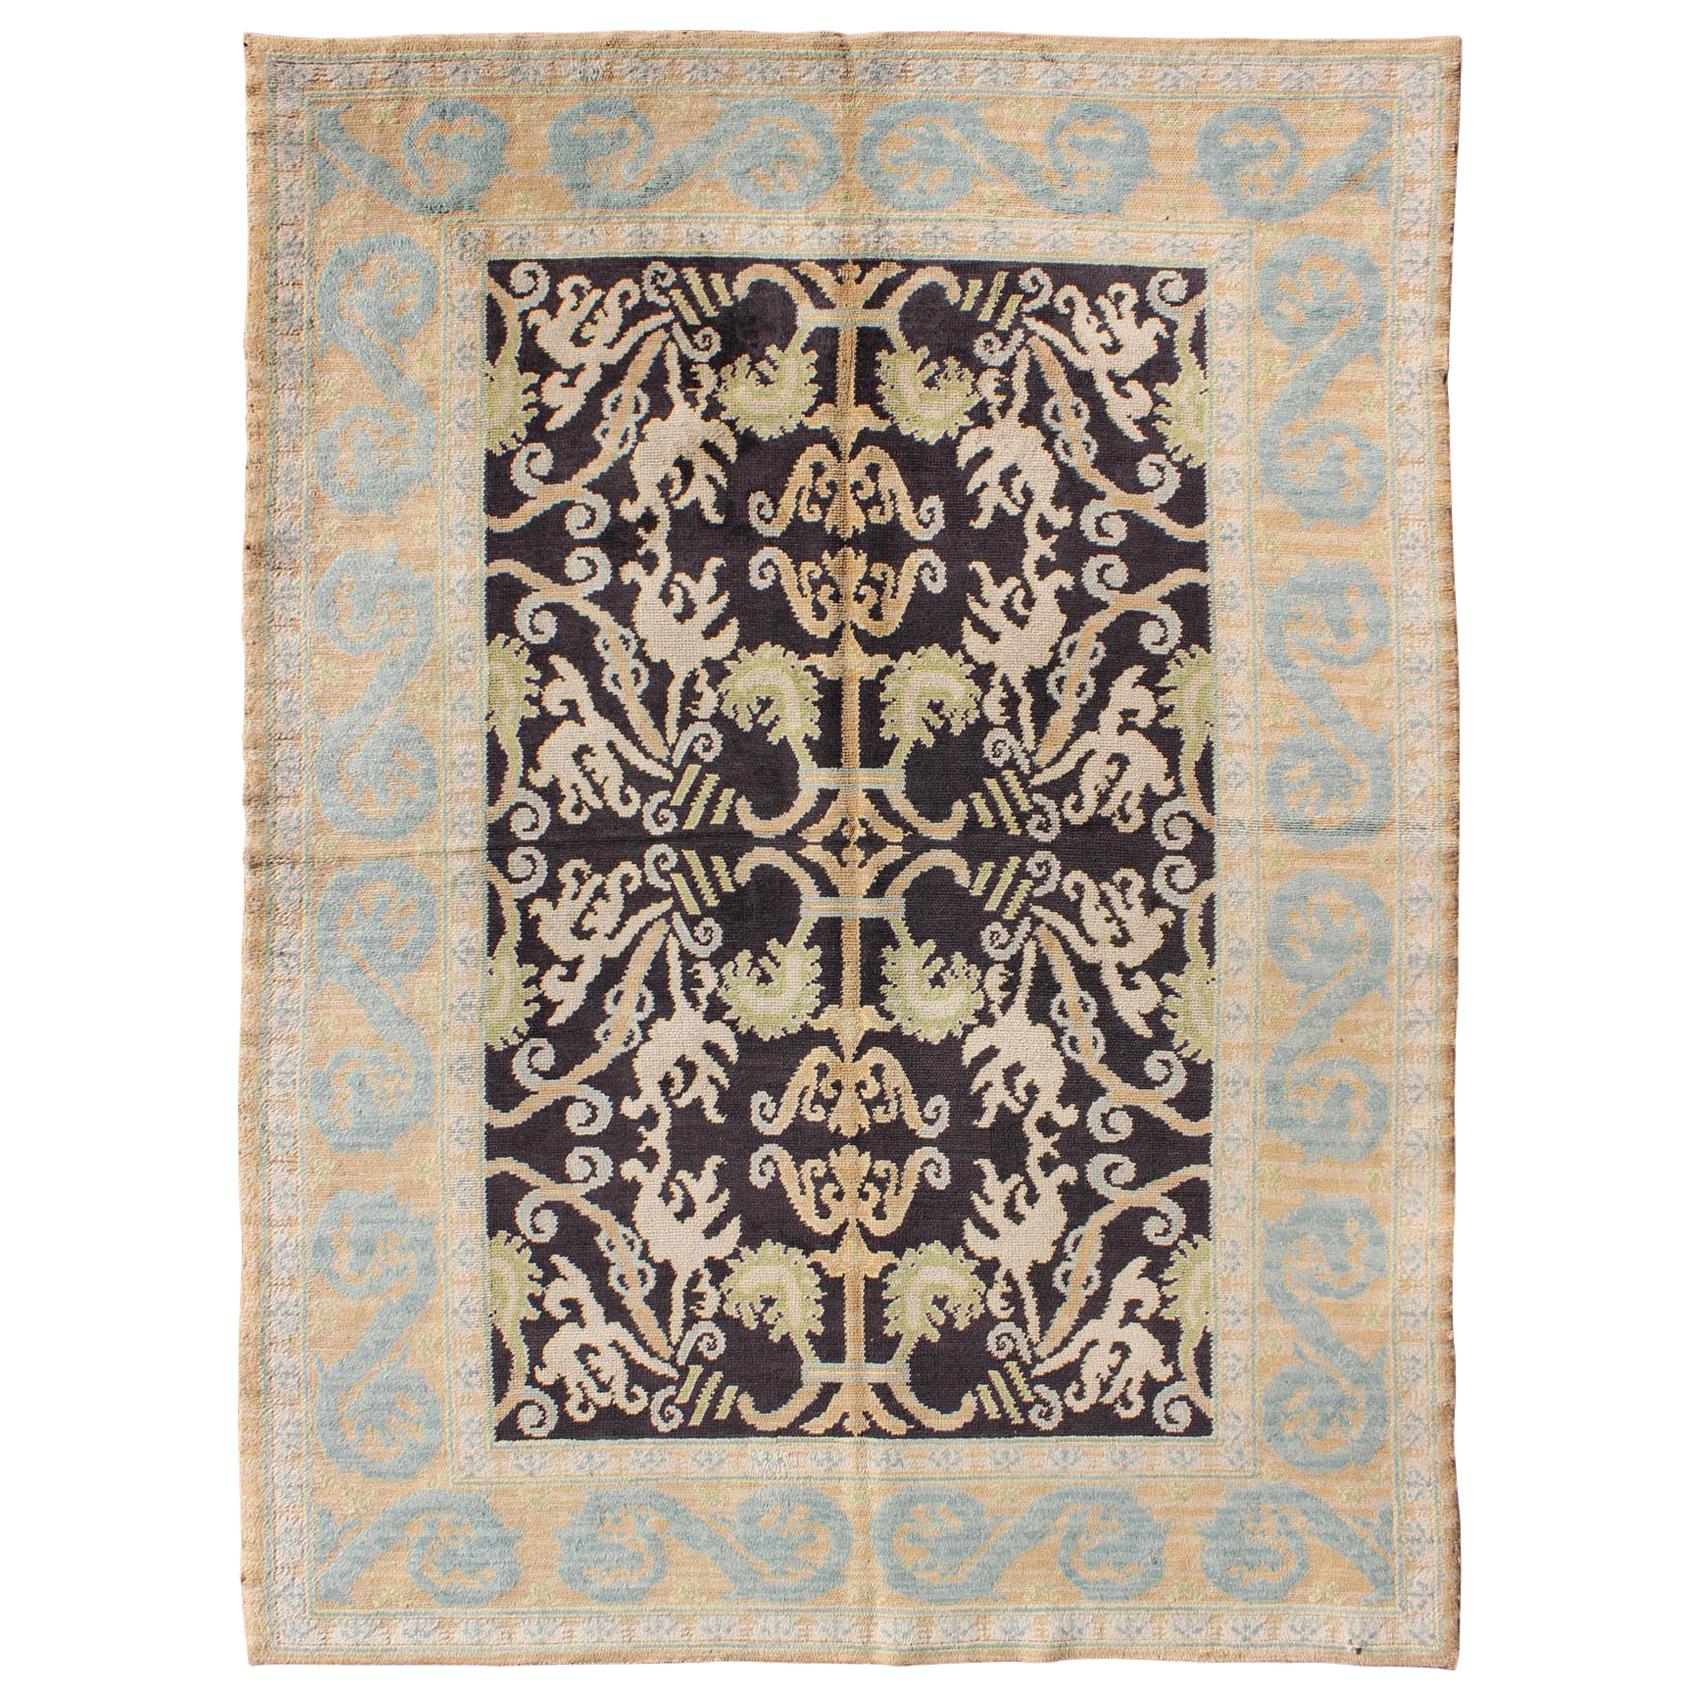 Antique Spanish Rug with All-Over Botanicals in Black, Light Blue, Light Green